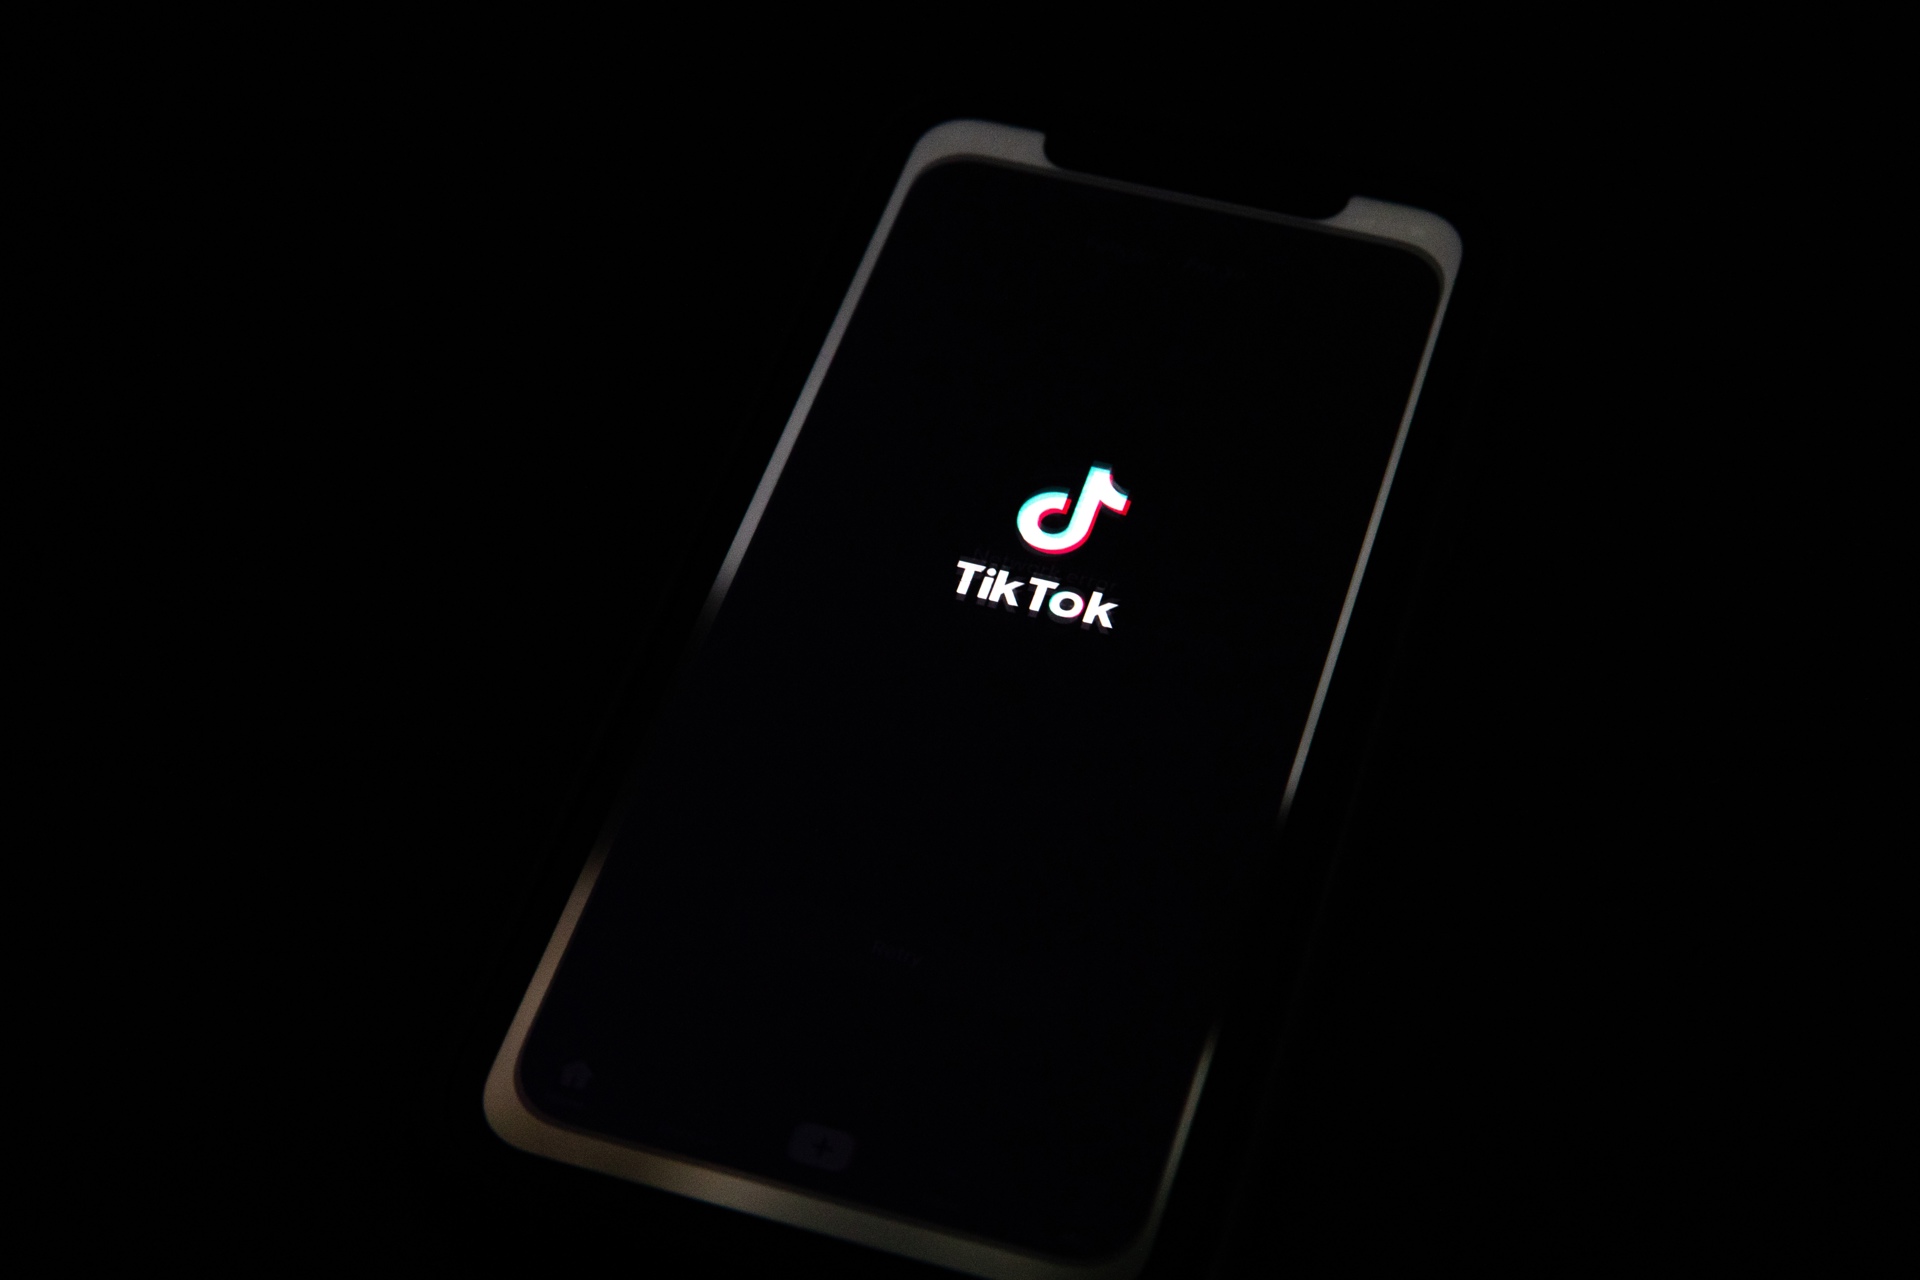 The US threatens to ban TikTok if its Chinese parent company does not sell shares: WSJ